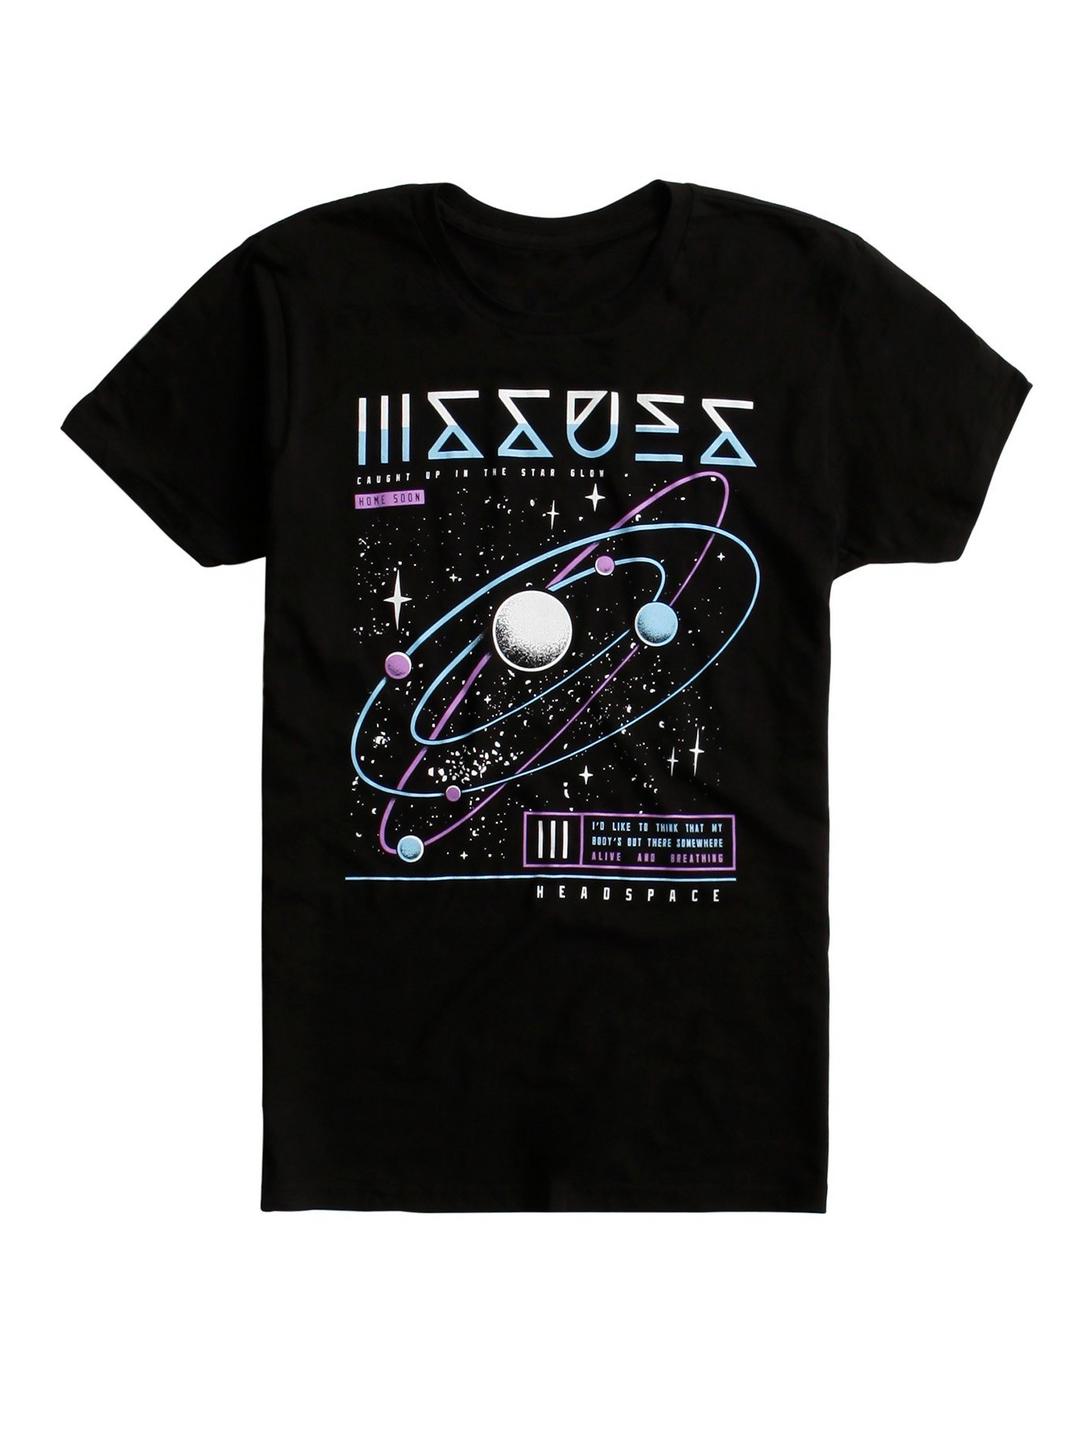 Issues Headspace T-Shirt, BLACK, hi-res